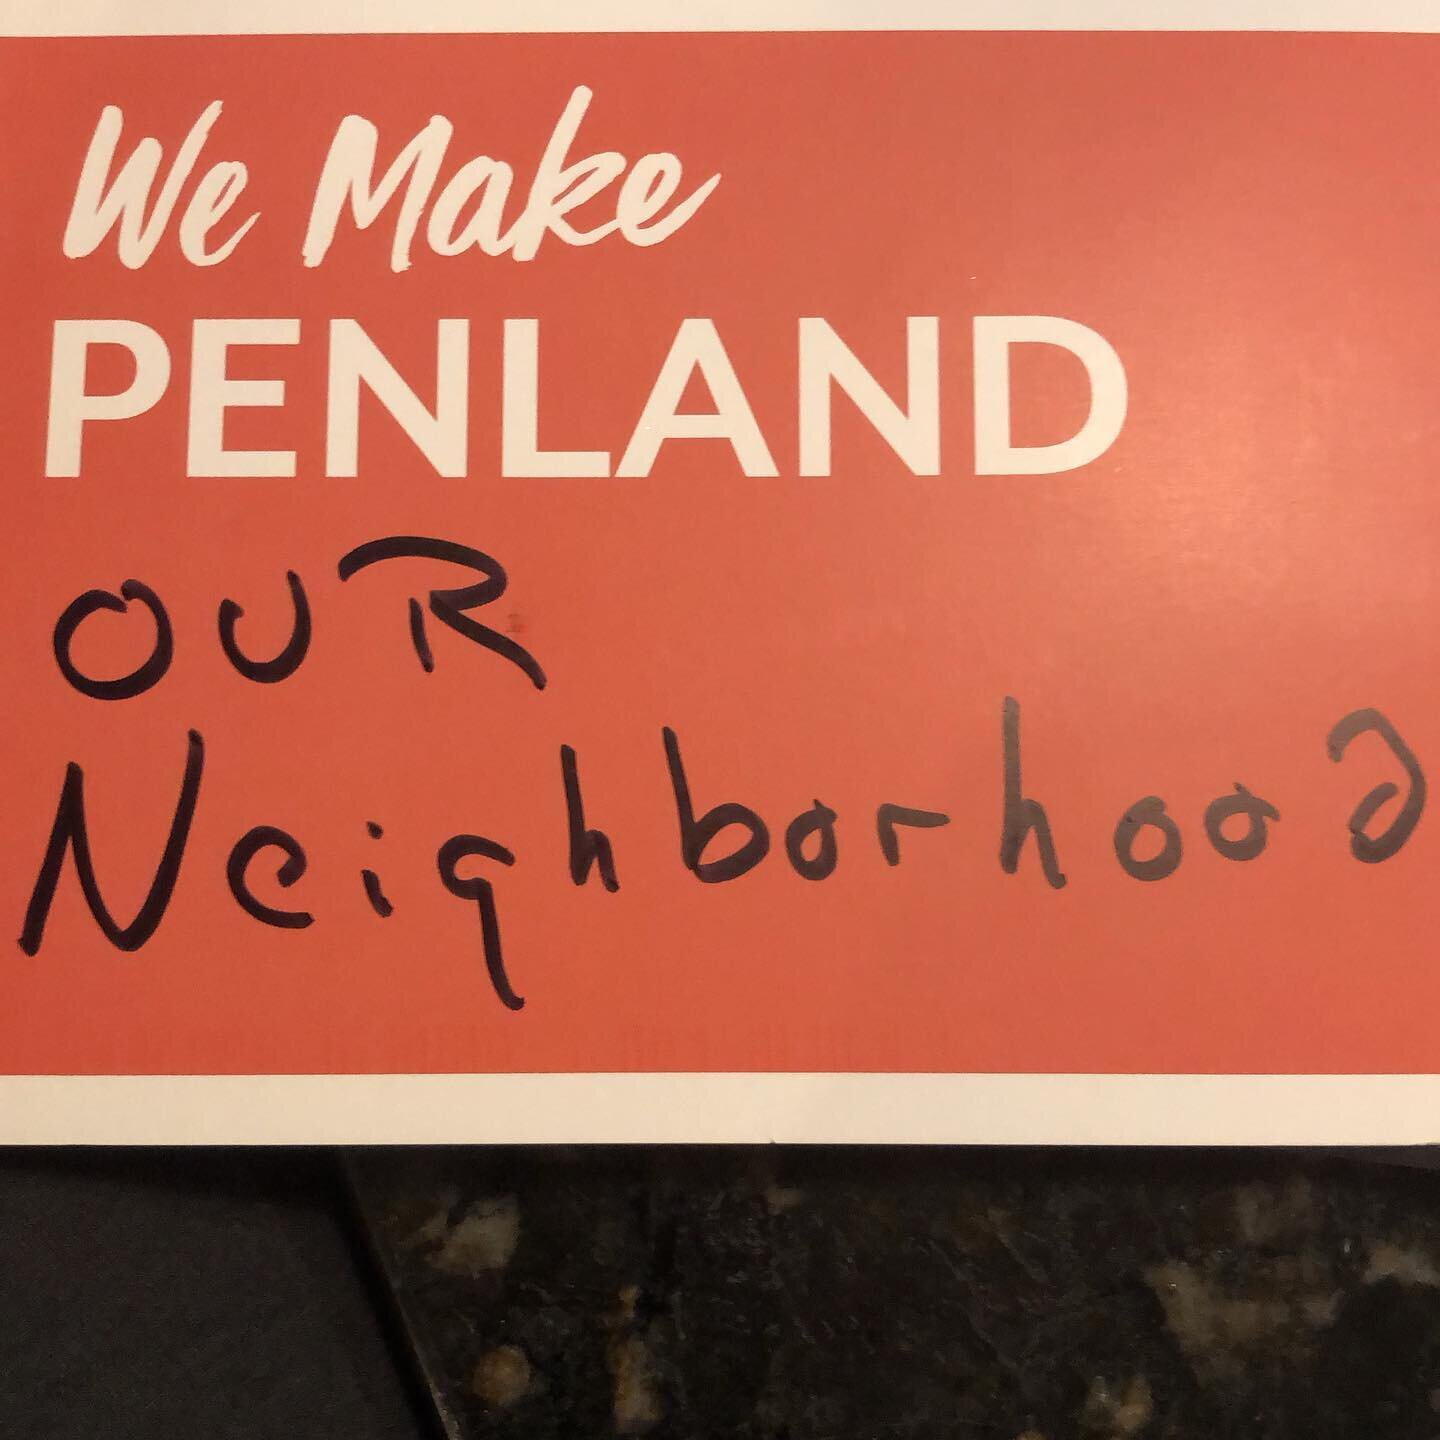 #wemakepenland getting married and movie night great things happen in our neighborhood